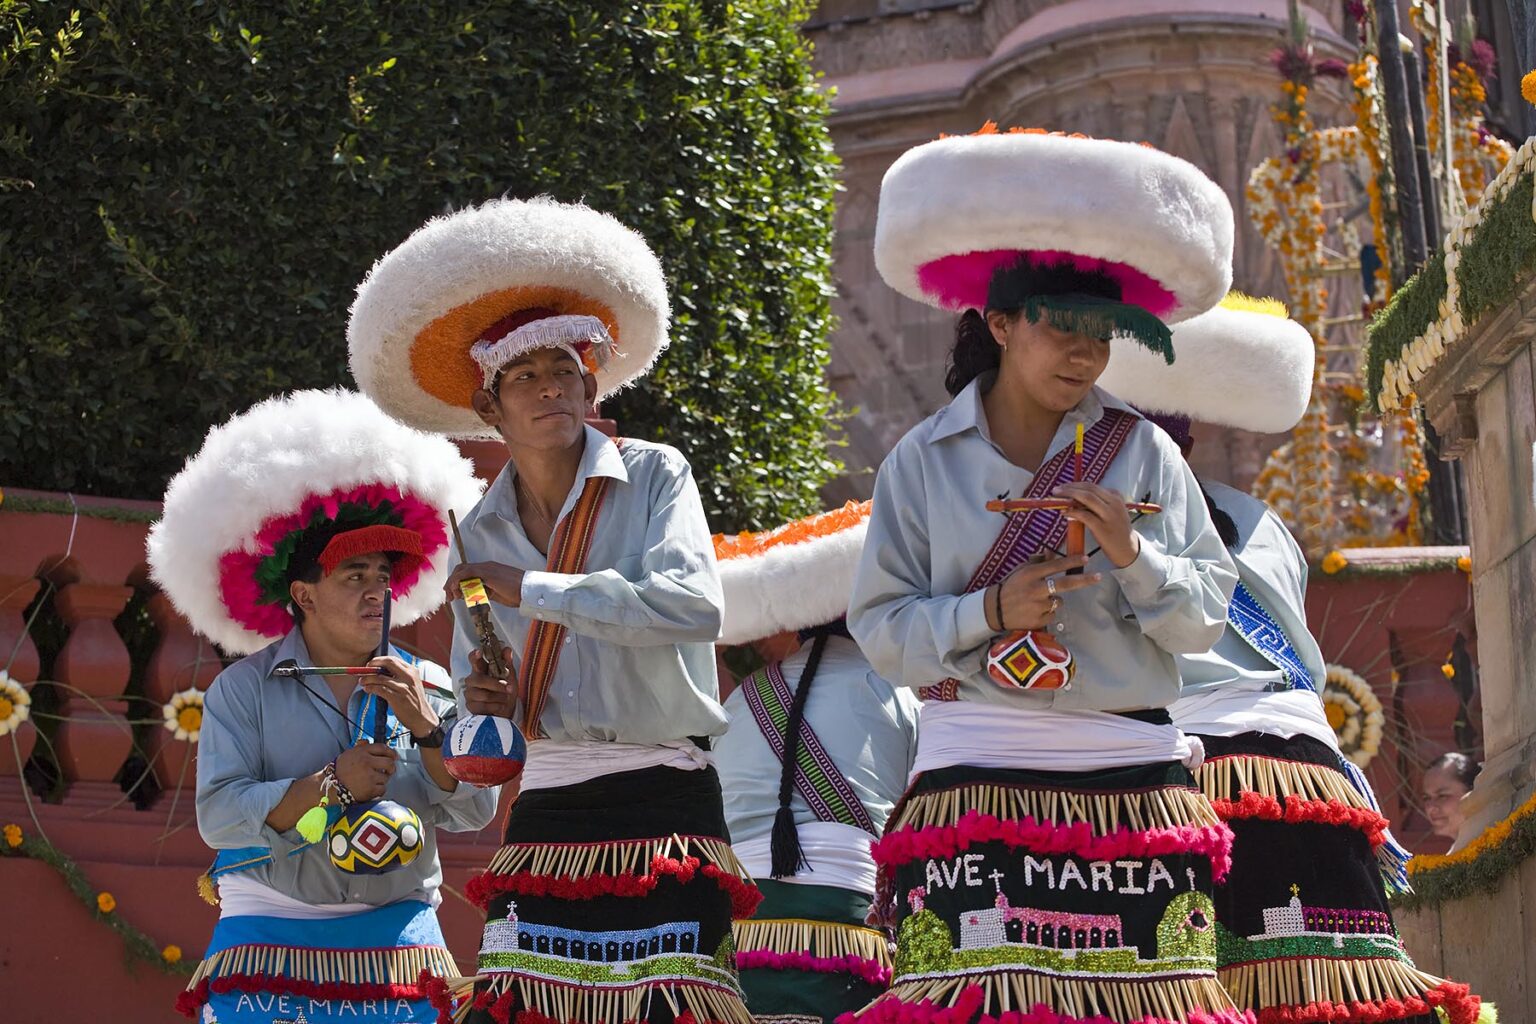 Dance troupes come from all parts of Mexico representing their region in the annual INDEPENDENCE DAY PARADE in September - SAN MIGUEL DE ALLENDE, MEXICO